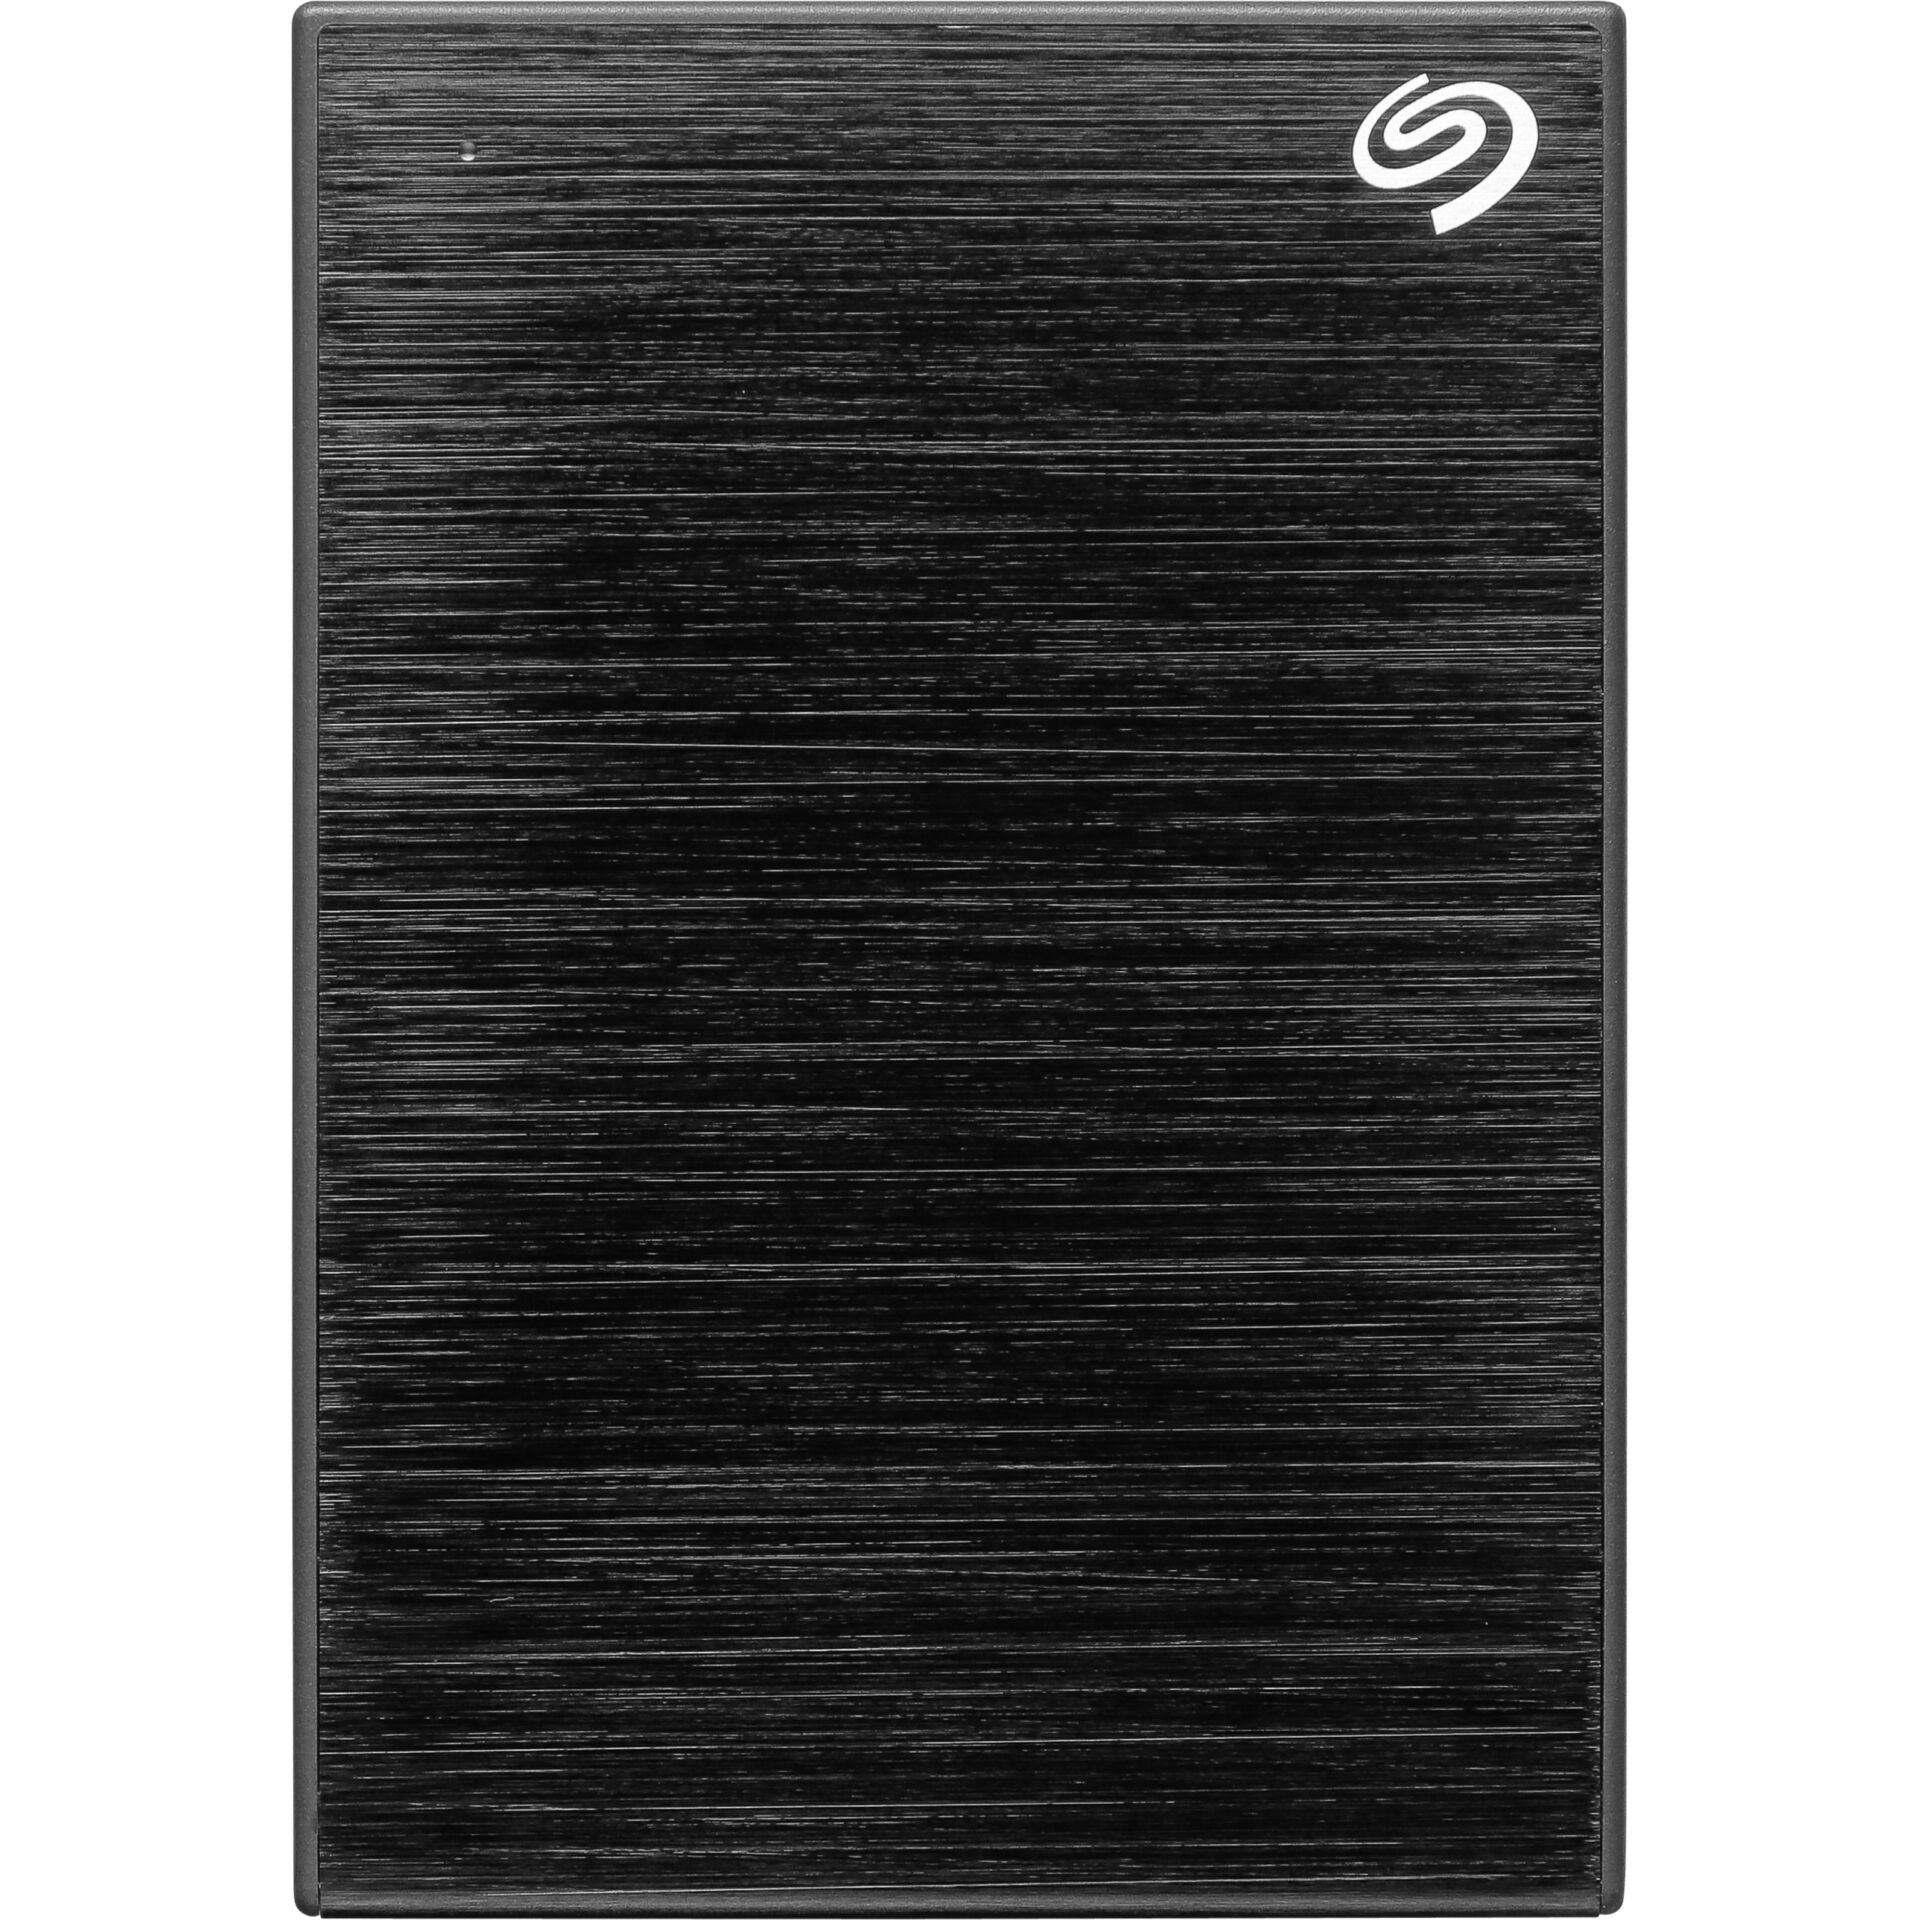 OneTouch Festplatte TB Portable 4 -Externe -Seagate Hardware/Electronic Seagate